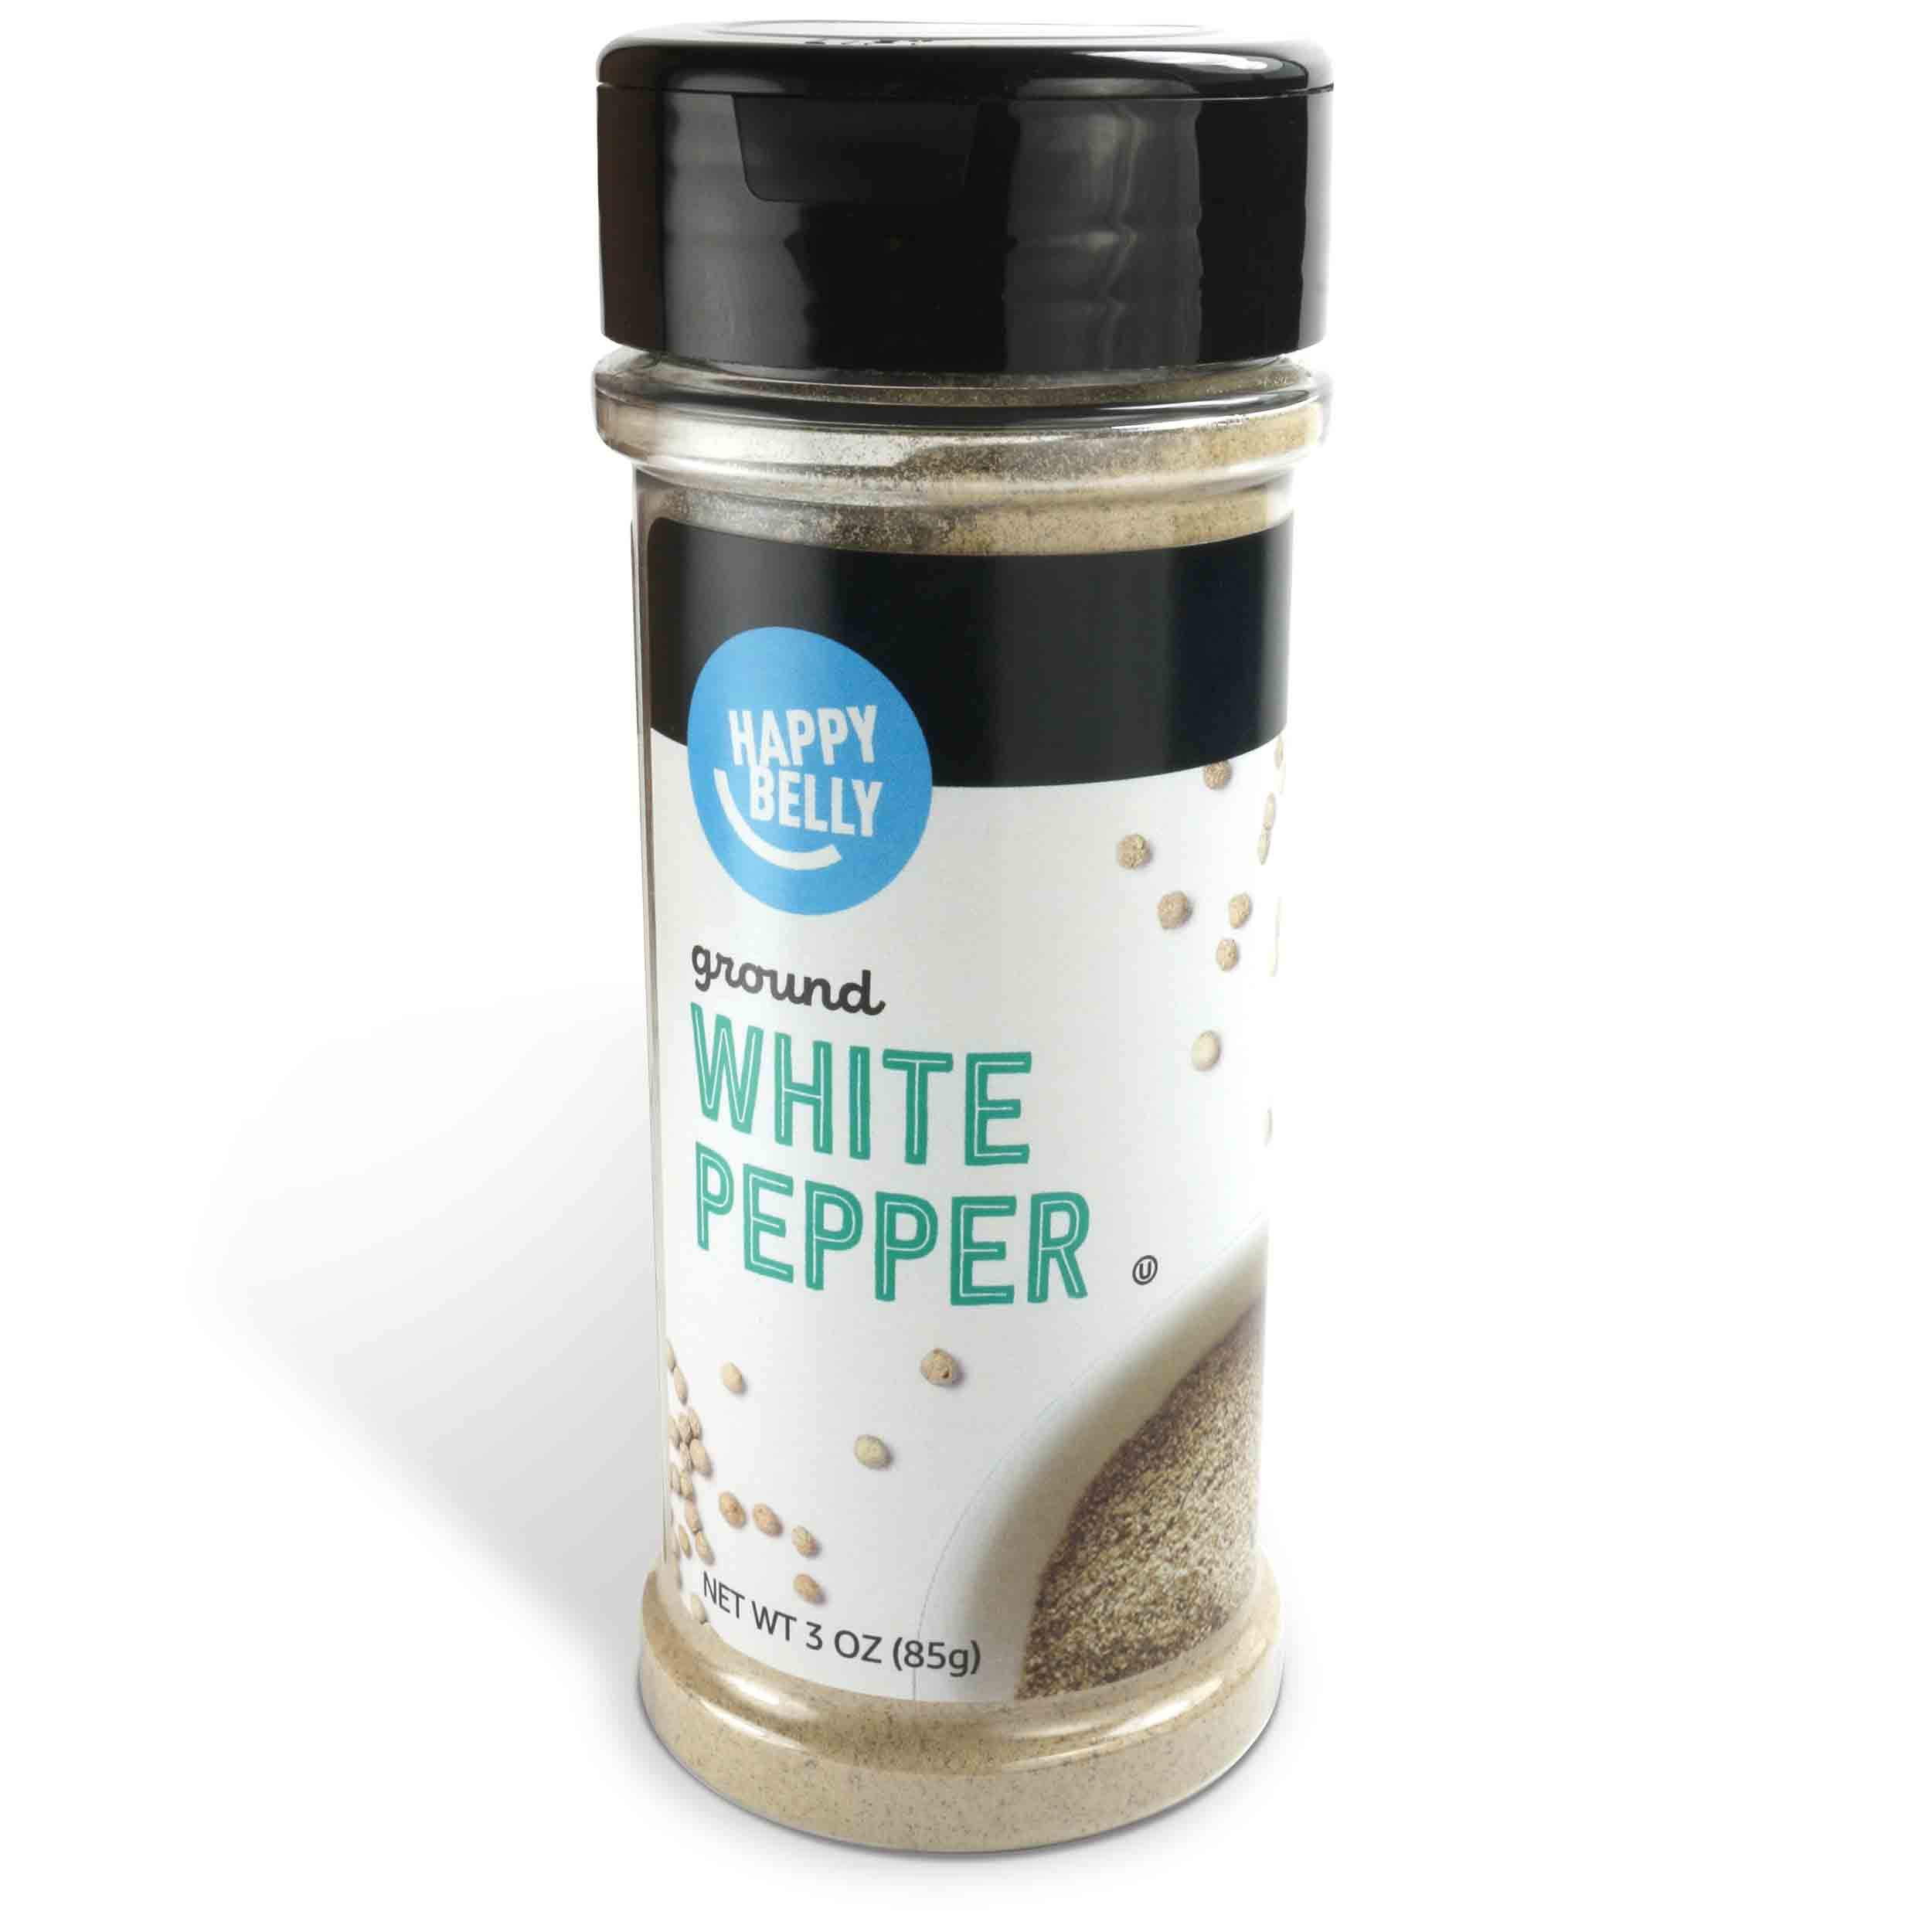 3-Oz Happy Belly Ground White Pepper $2.29 + Free Shipping w/ Prime or on orders over $35